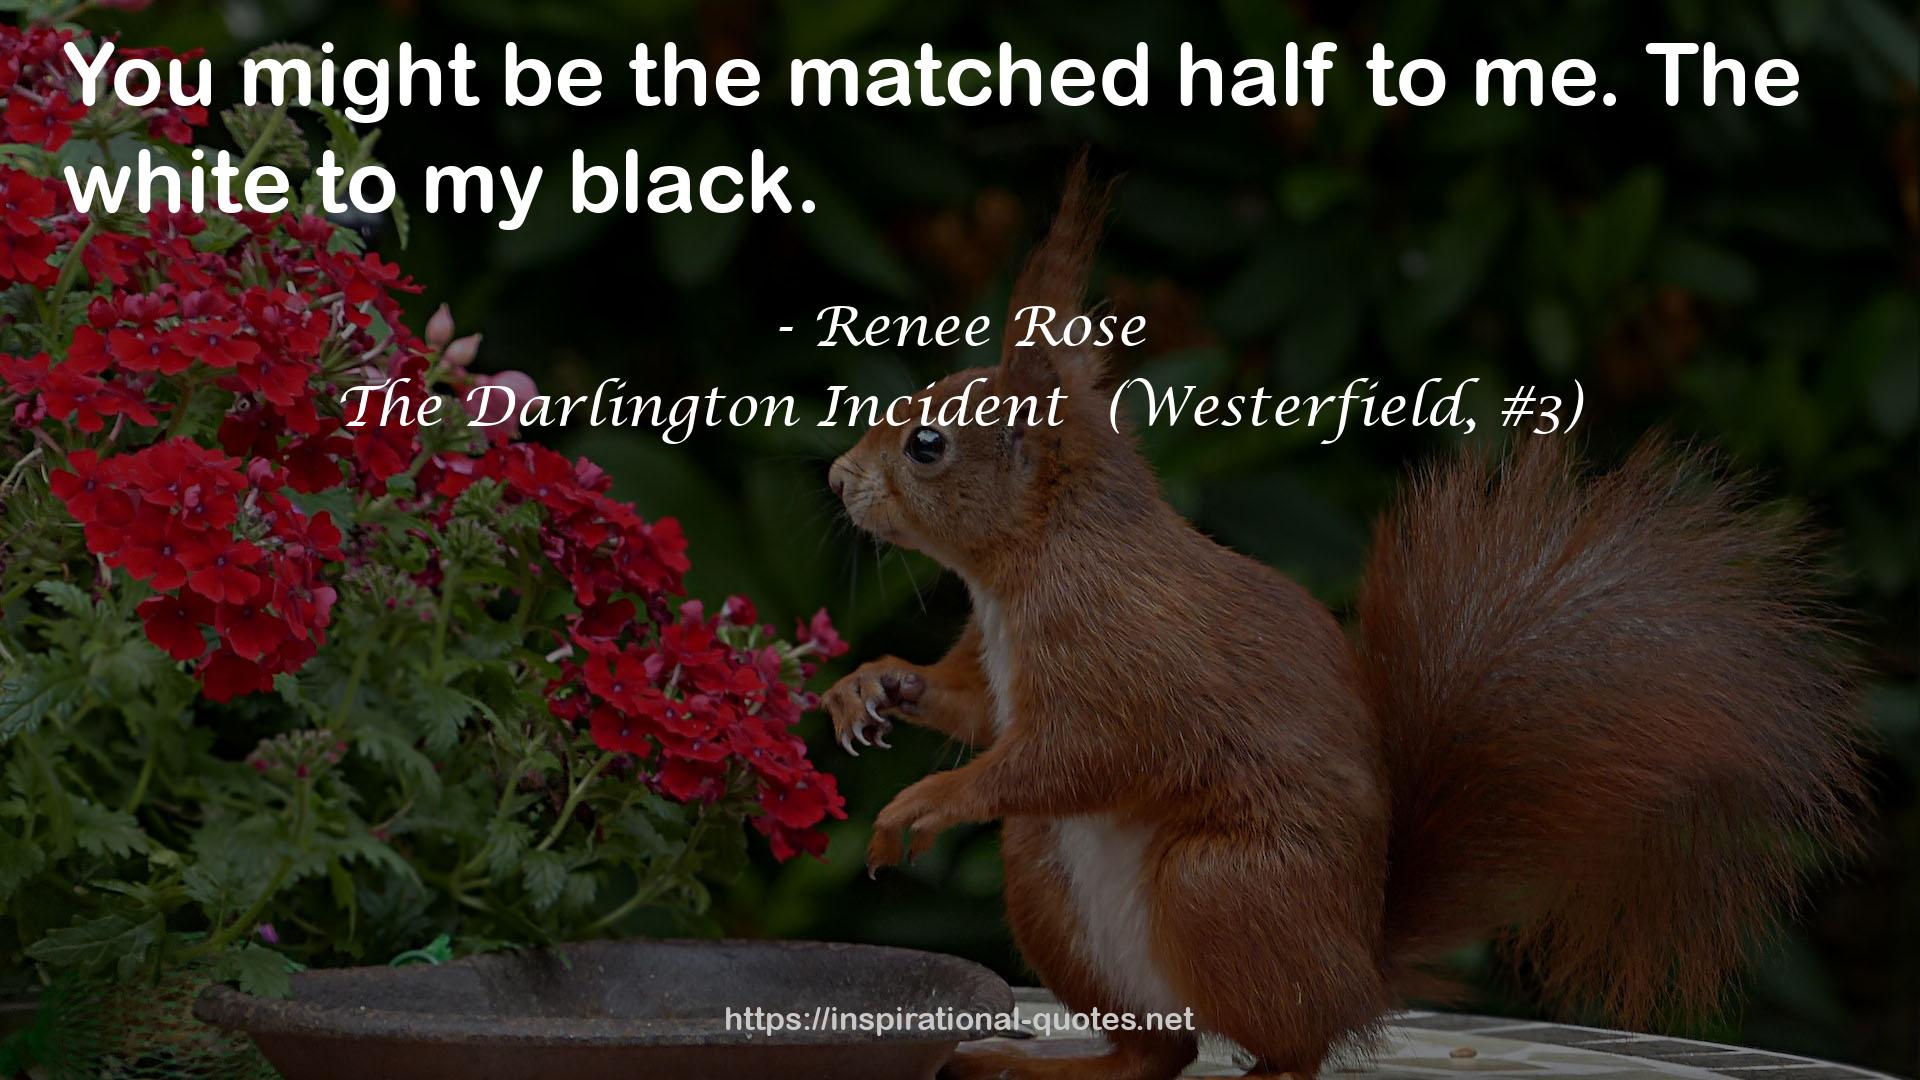 The Darlington Incident  (Westerfield, #3) QUOTES